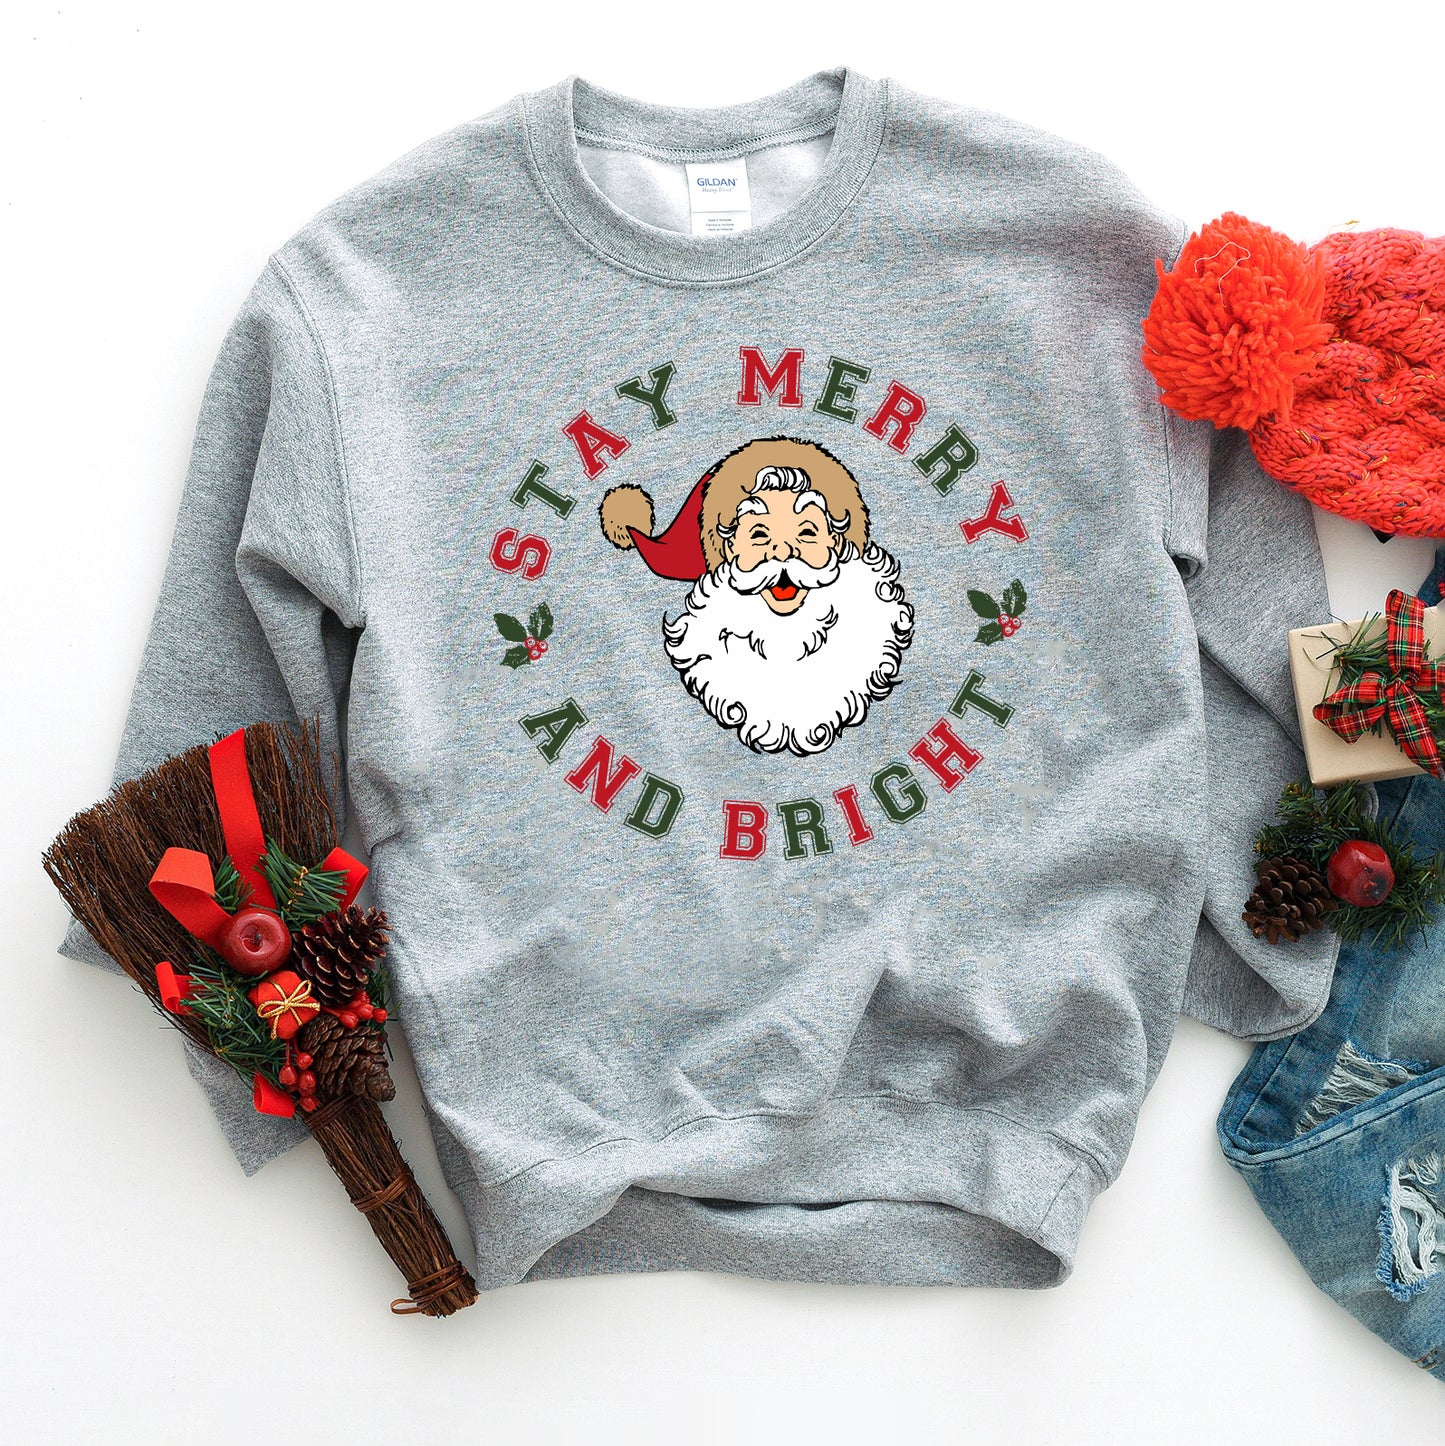 Stay Merry and Bright Circle |Sweatshirt